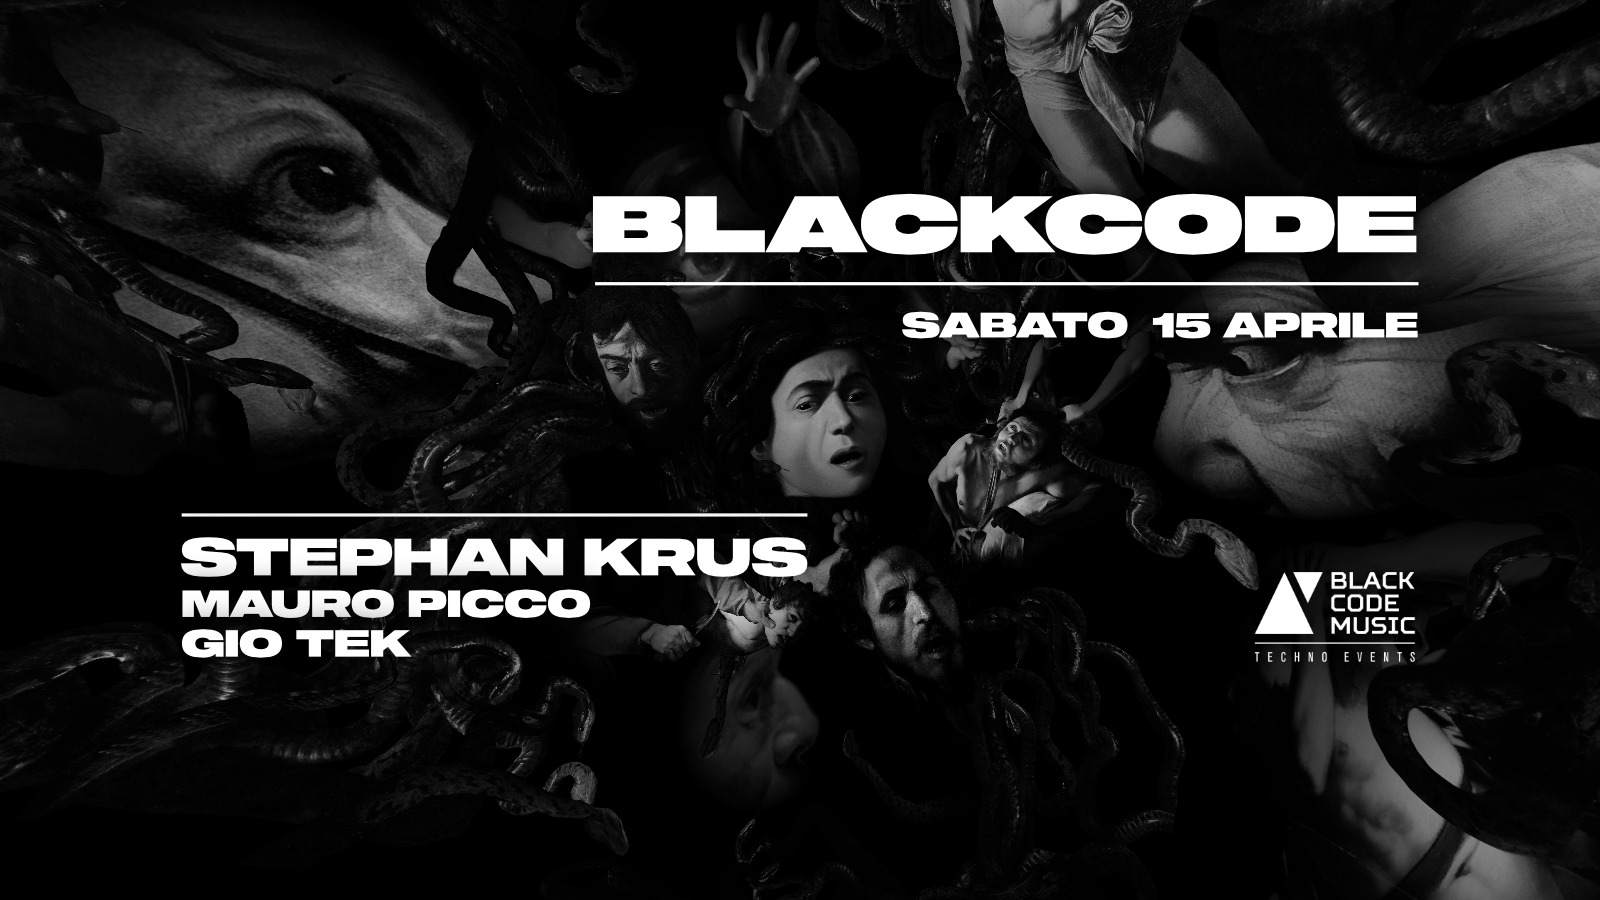 Blackcode with Stephan Krus - フライヤー表